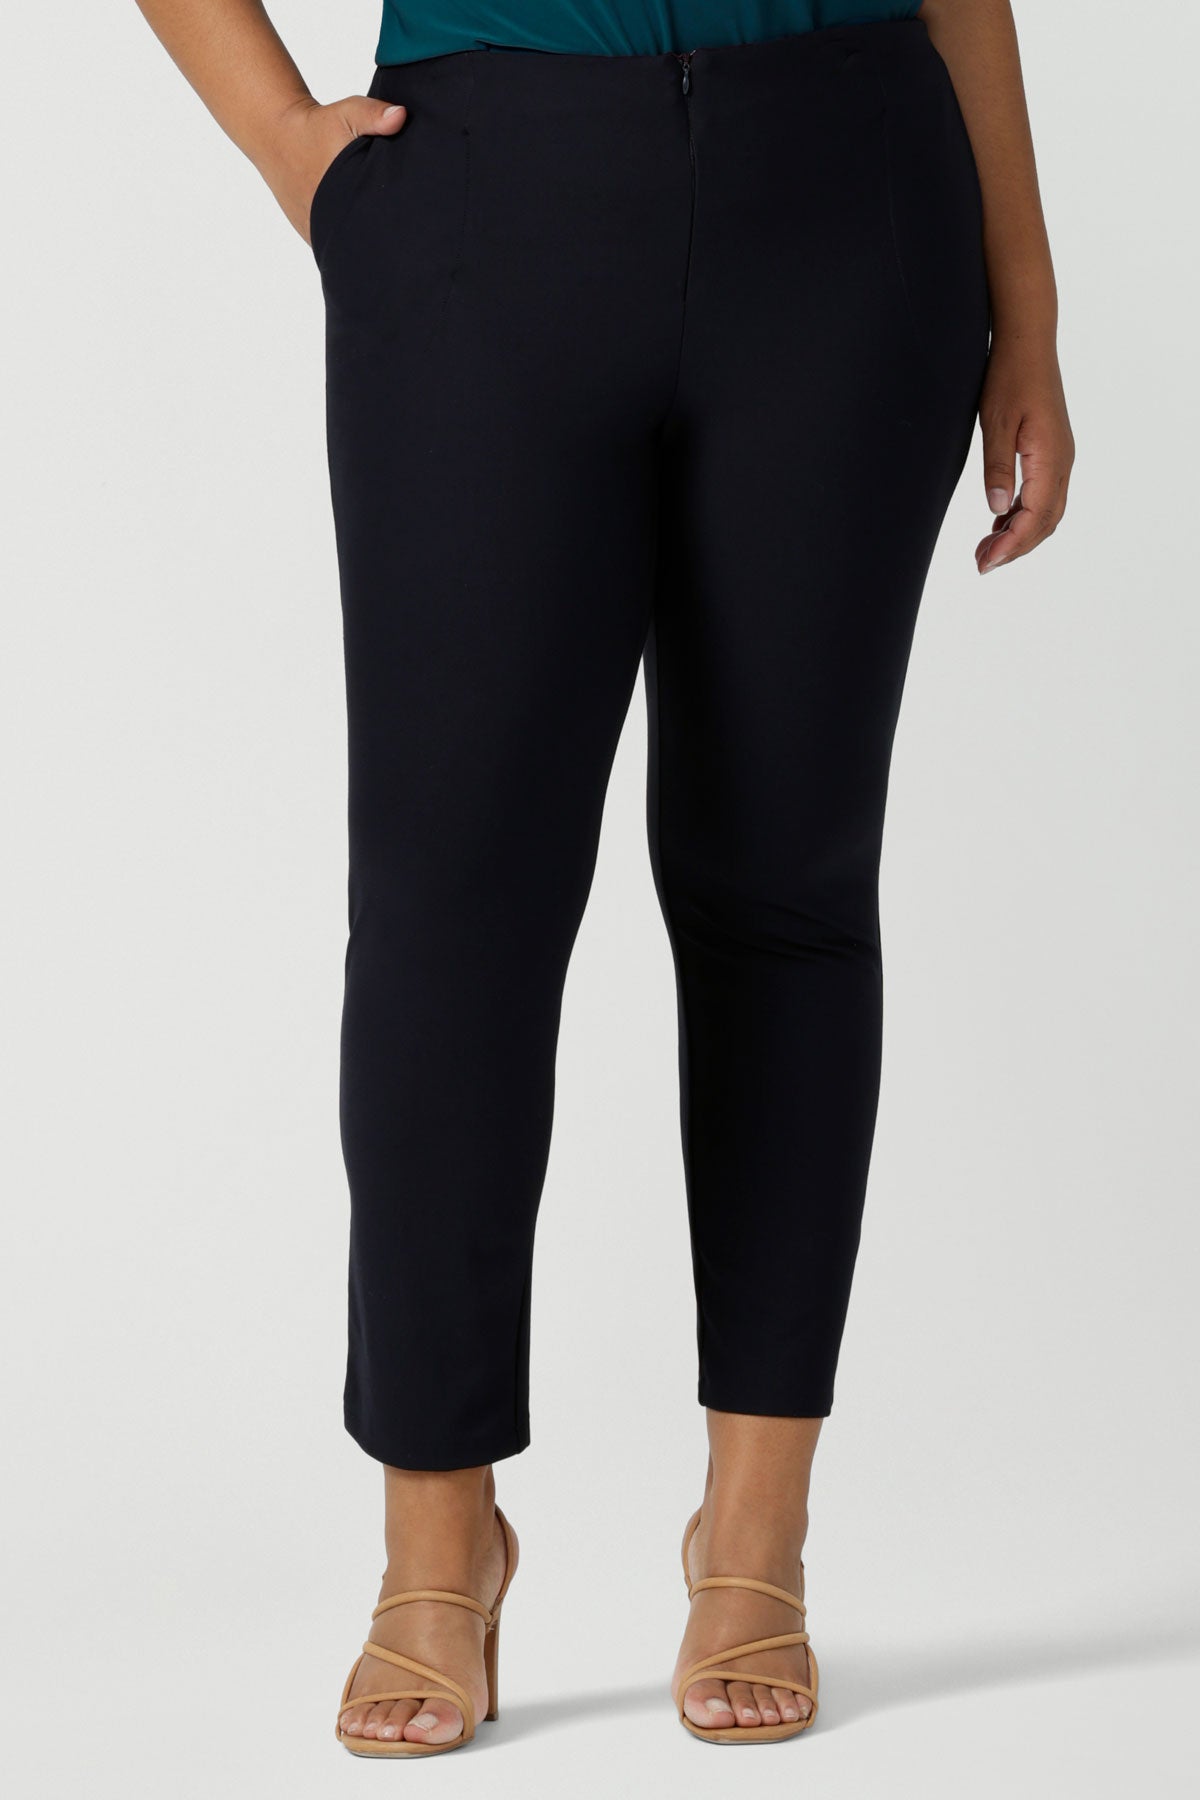 Slim leg, cropped length navy pants for work wear and weekend wear. These stretchy women's trousers make great pants for your capsule wardrobe. Made in Australia by Australian and New Zealand women's clothing label petite to plus sizes 8-24.